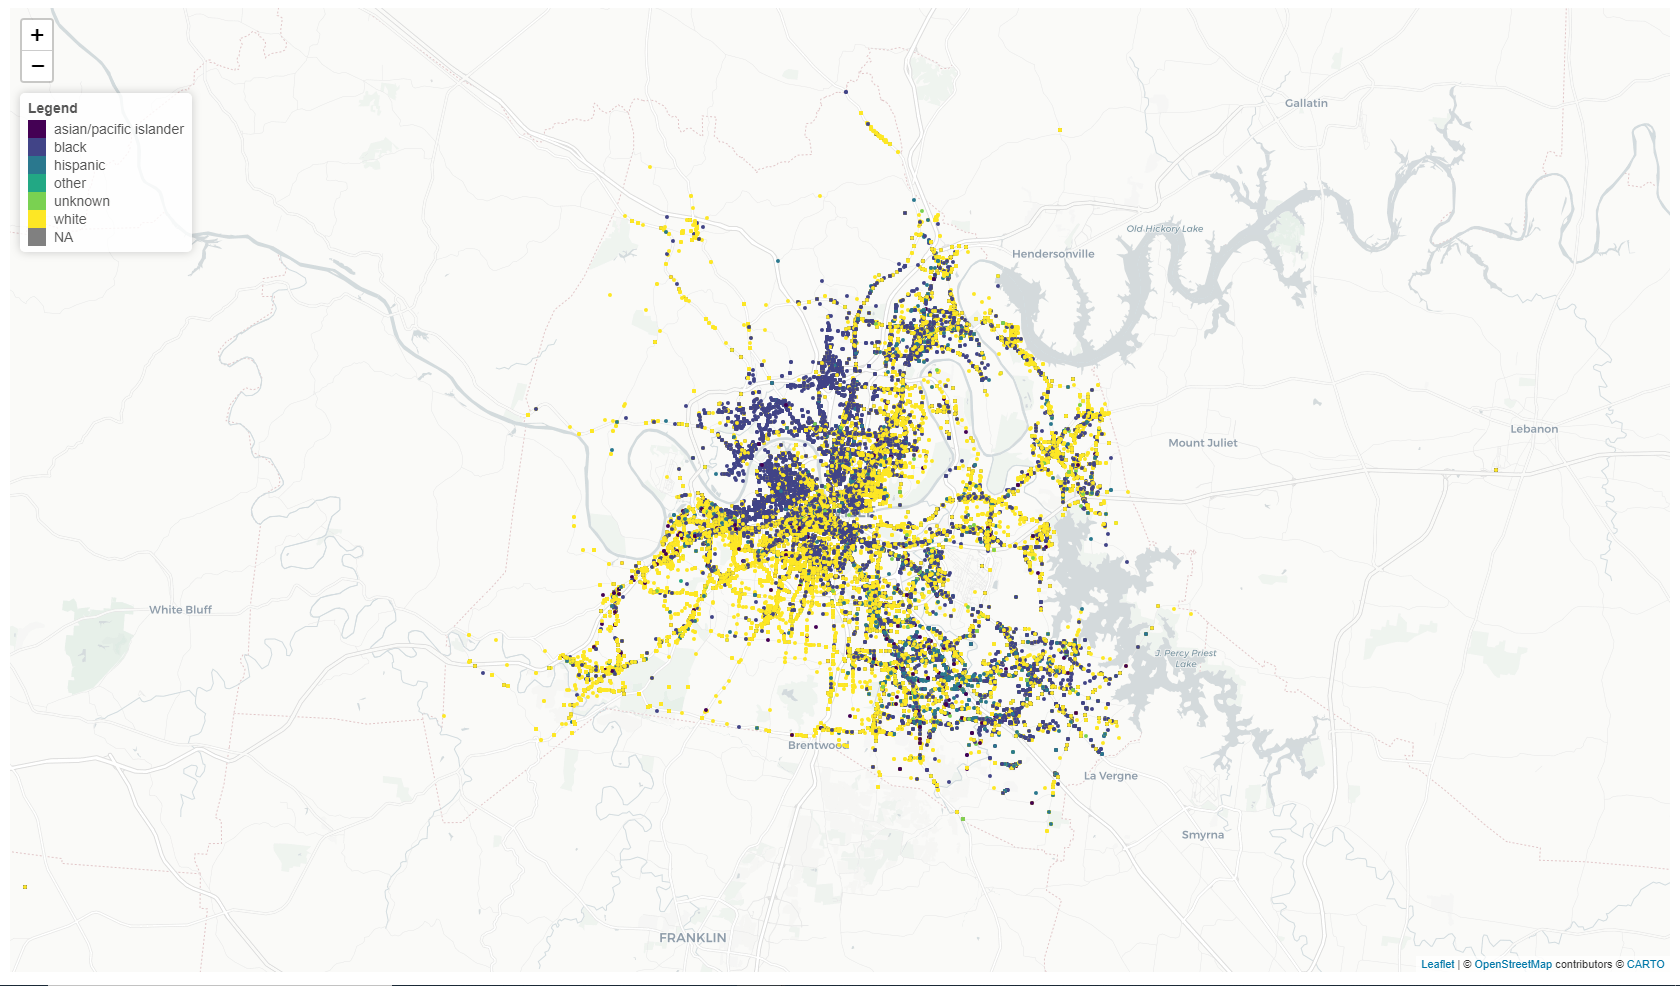 Map of Police Stops Colored by Race Over Nashville